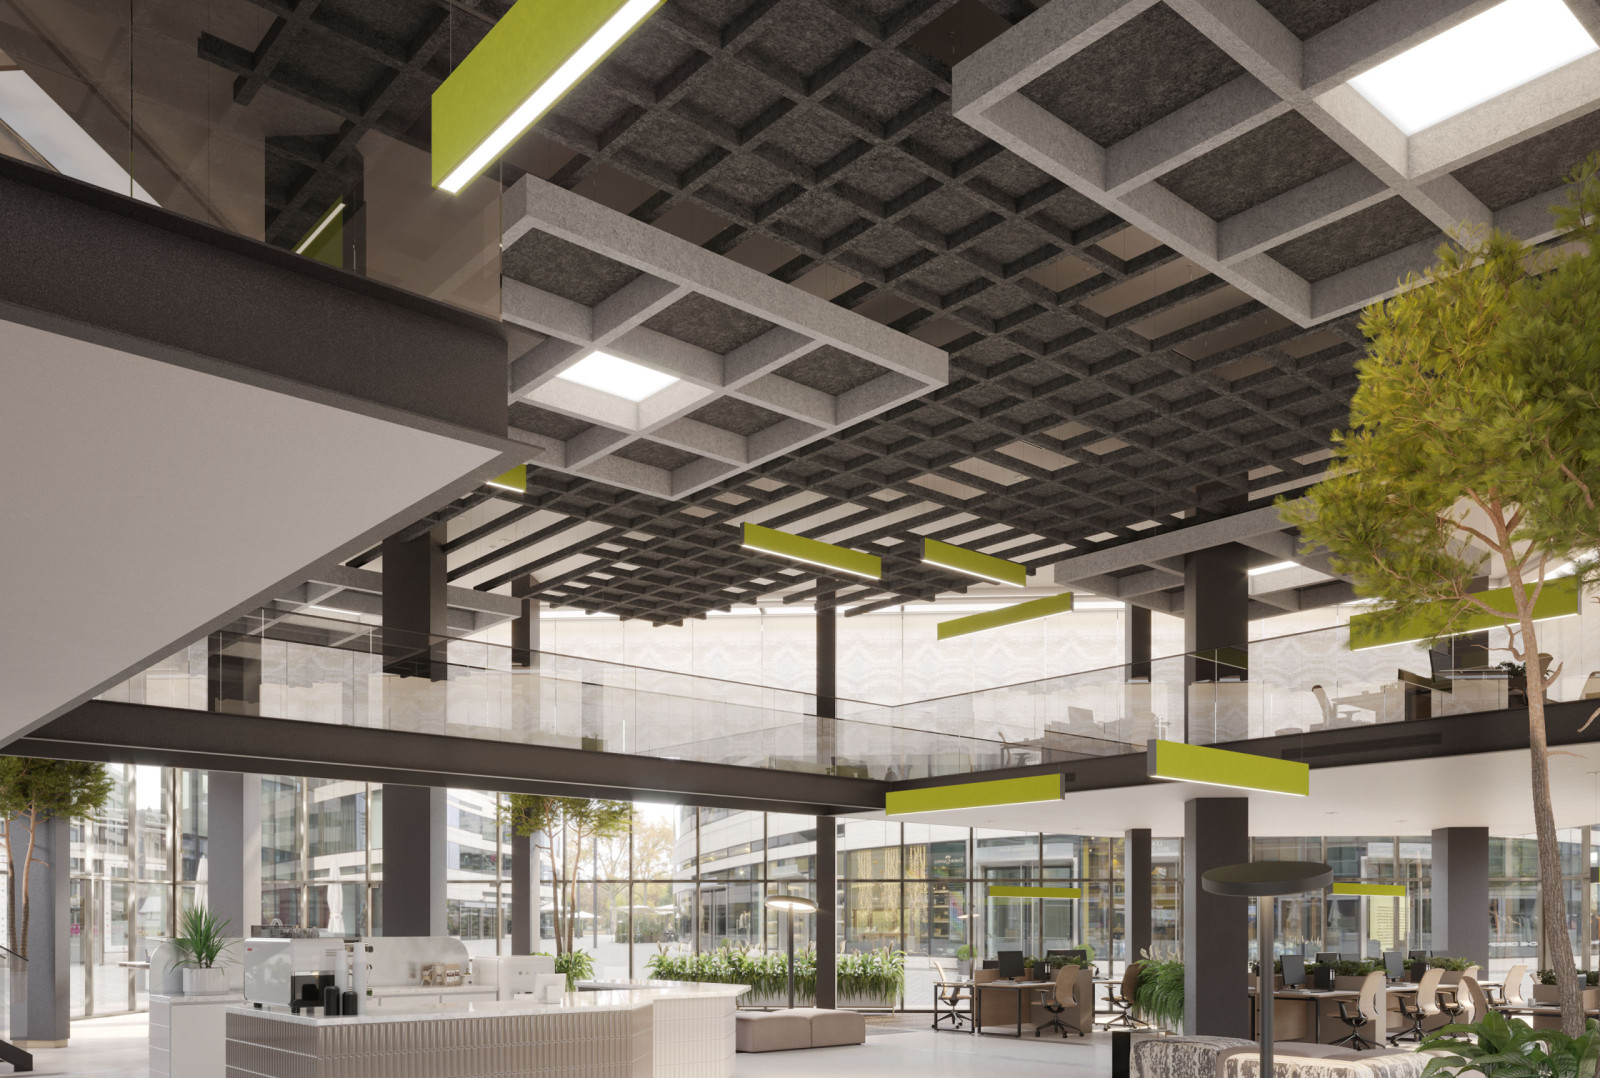 Open office space with ample seating areas. There is a tree inside the space. There are green, gray and white ceiling panels.